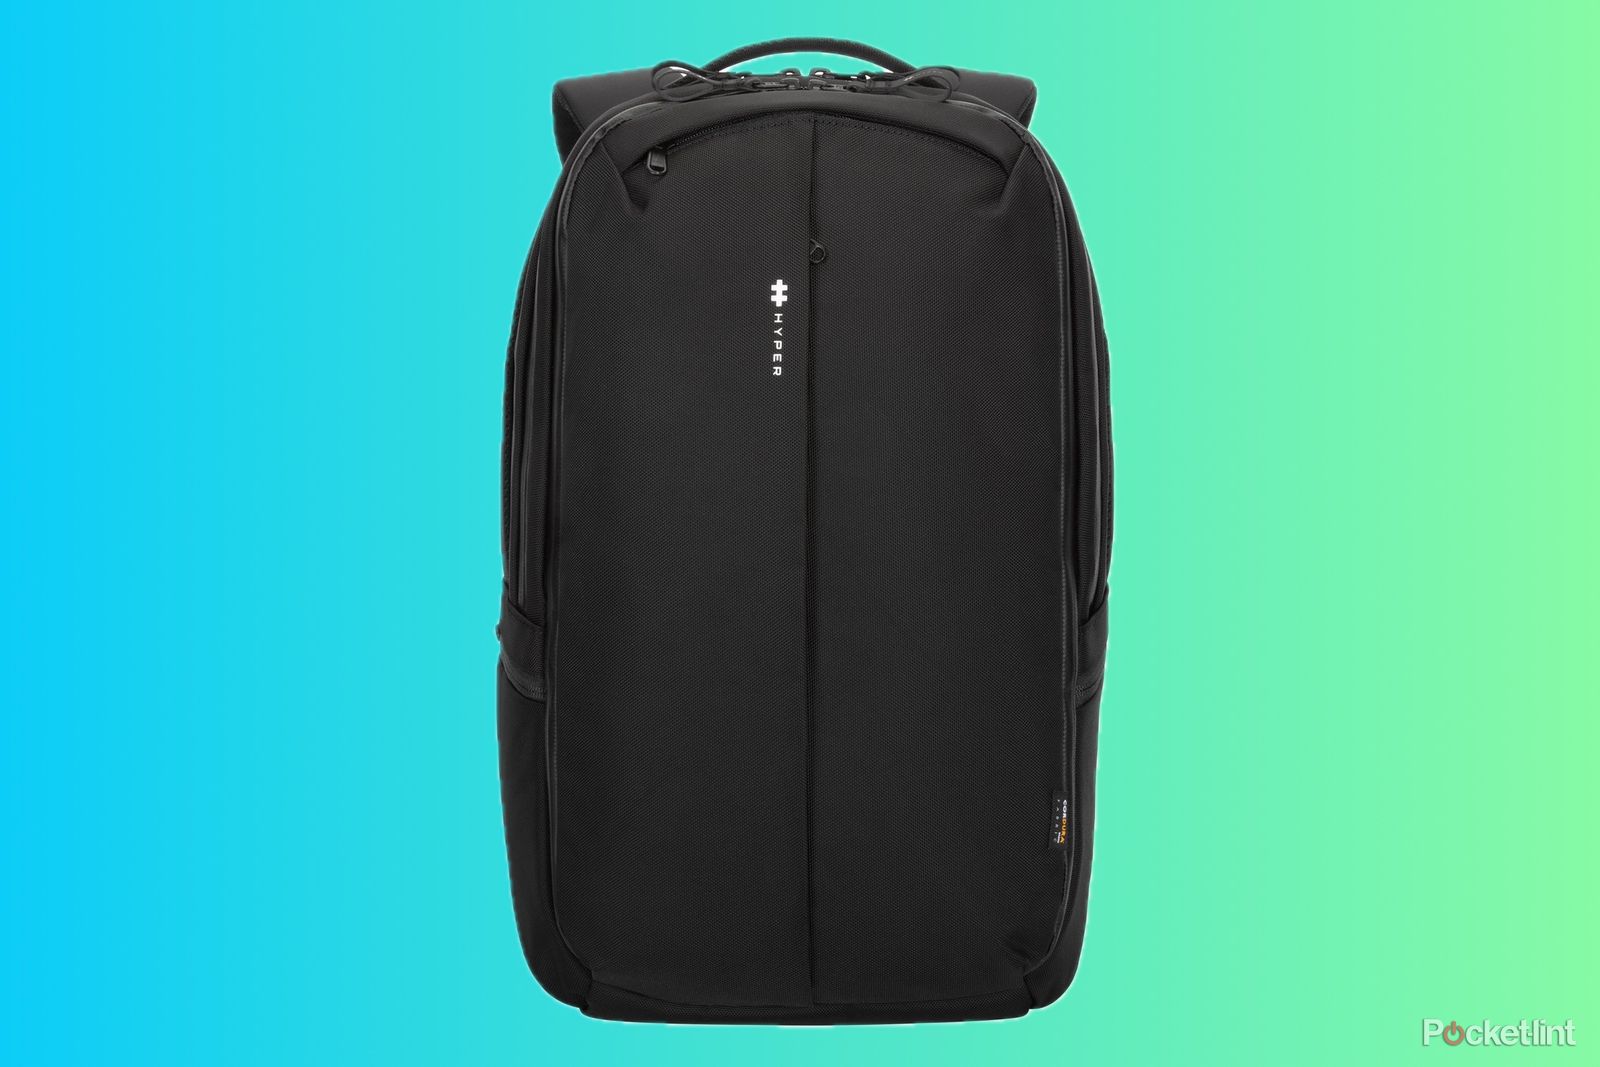 The HyperPack Pro backpack with Find My integration. 